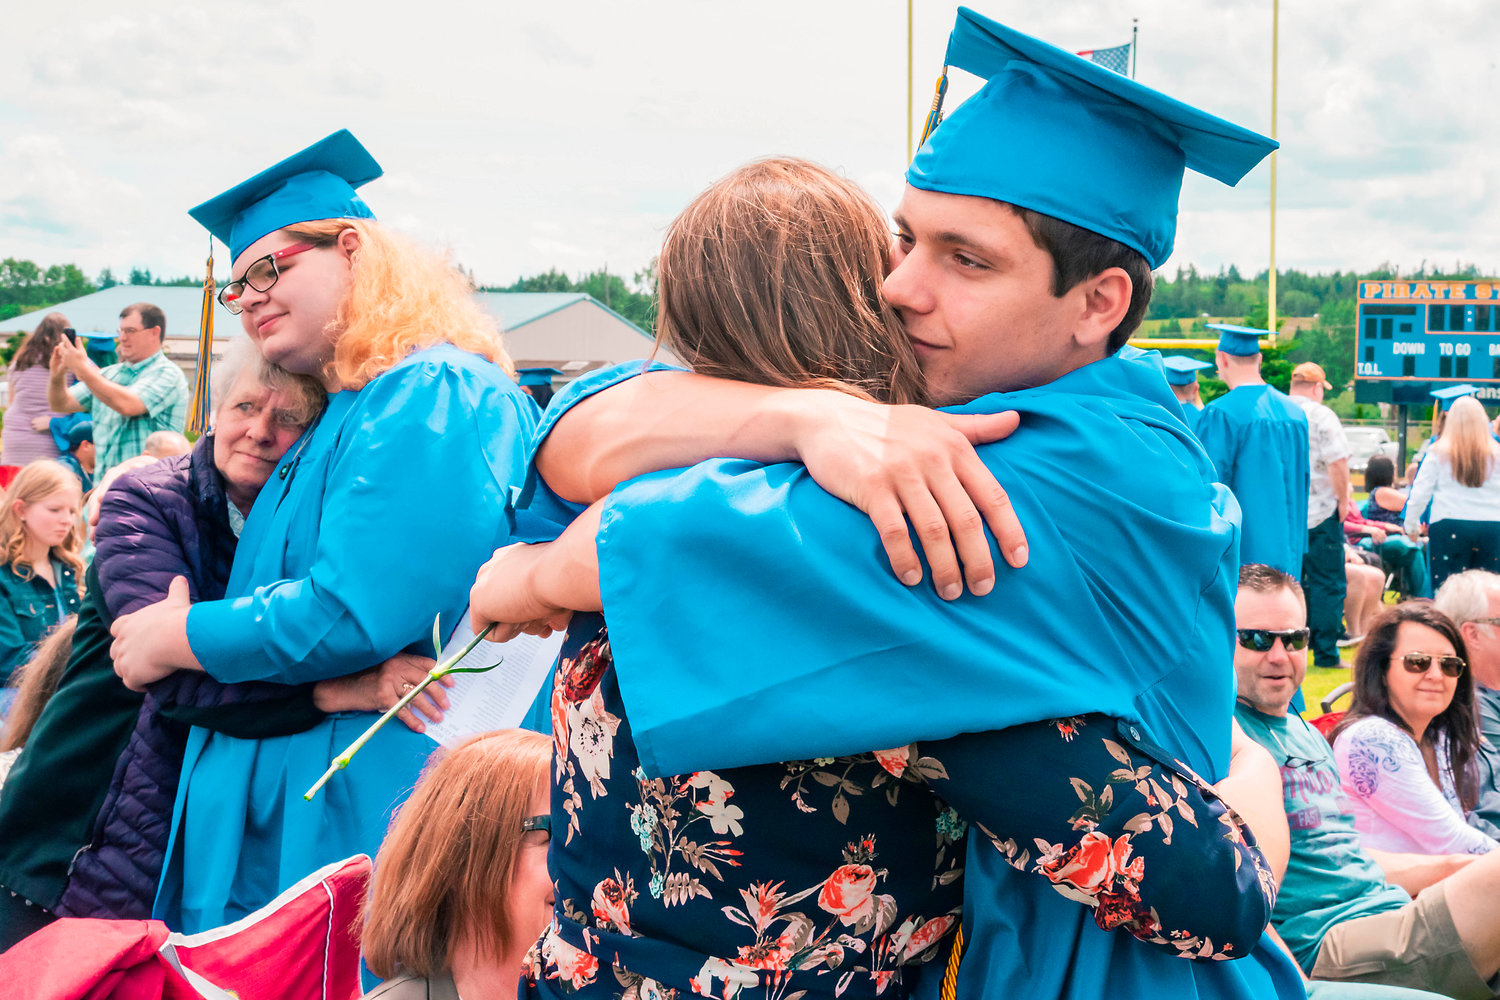 FILE PHOTO — Graduates greet family with hugs and flowers during a graduation ceremony at Adna High School.